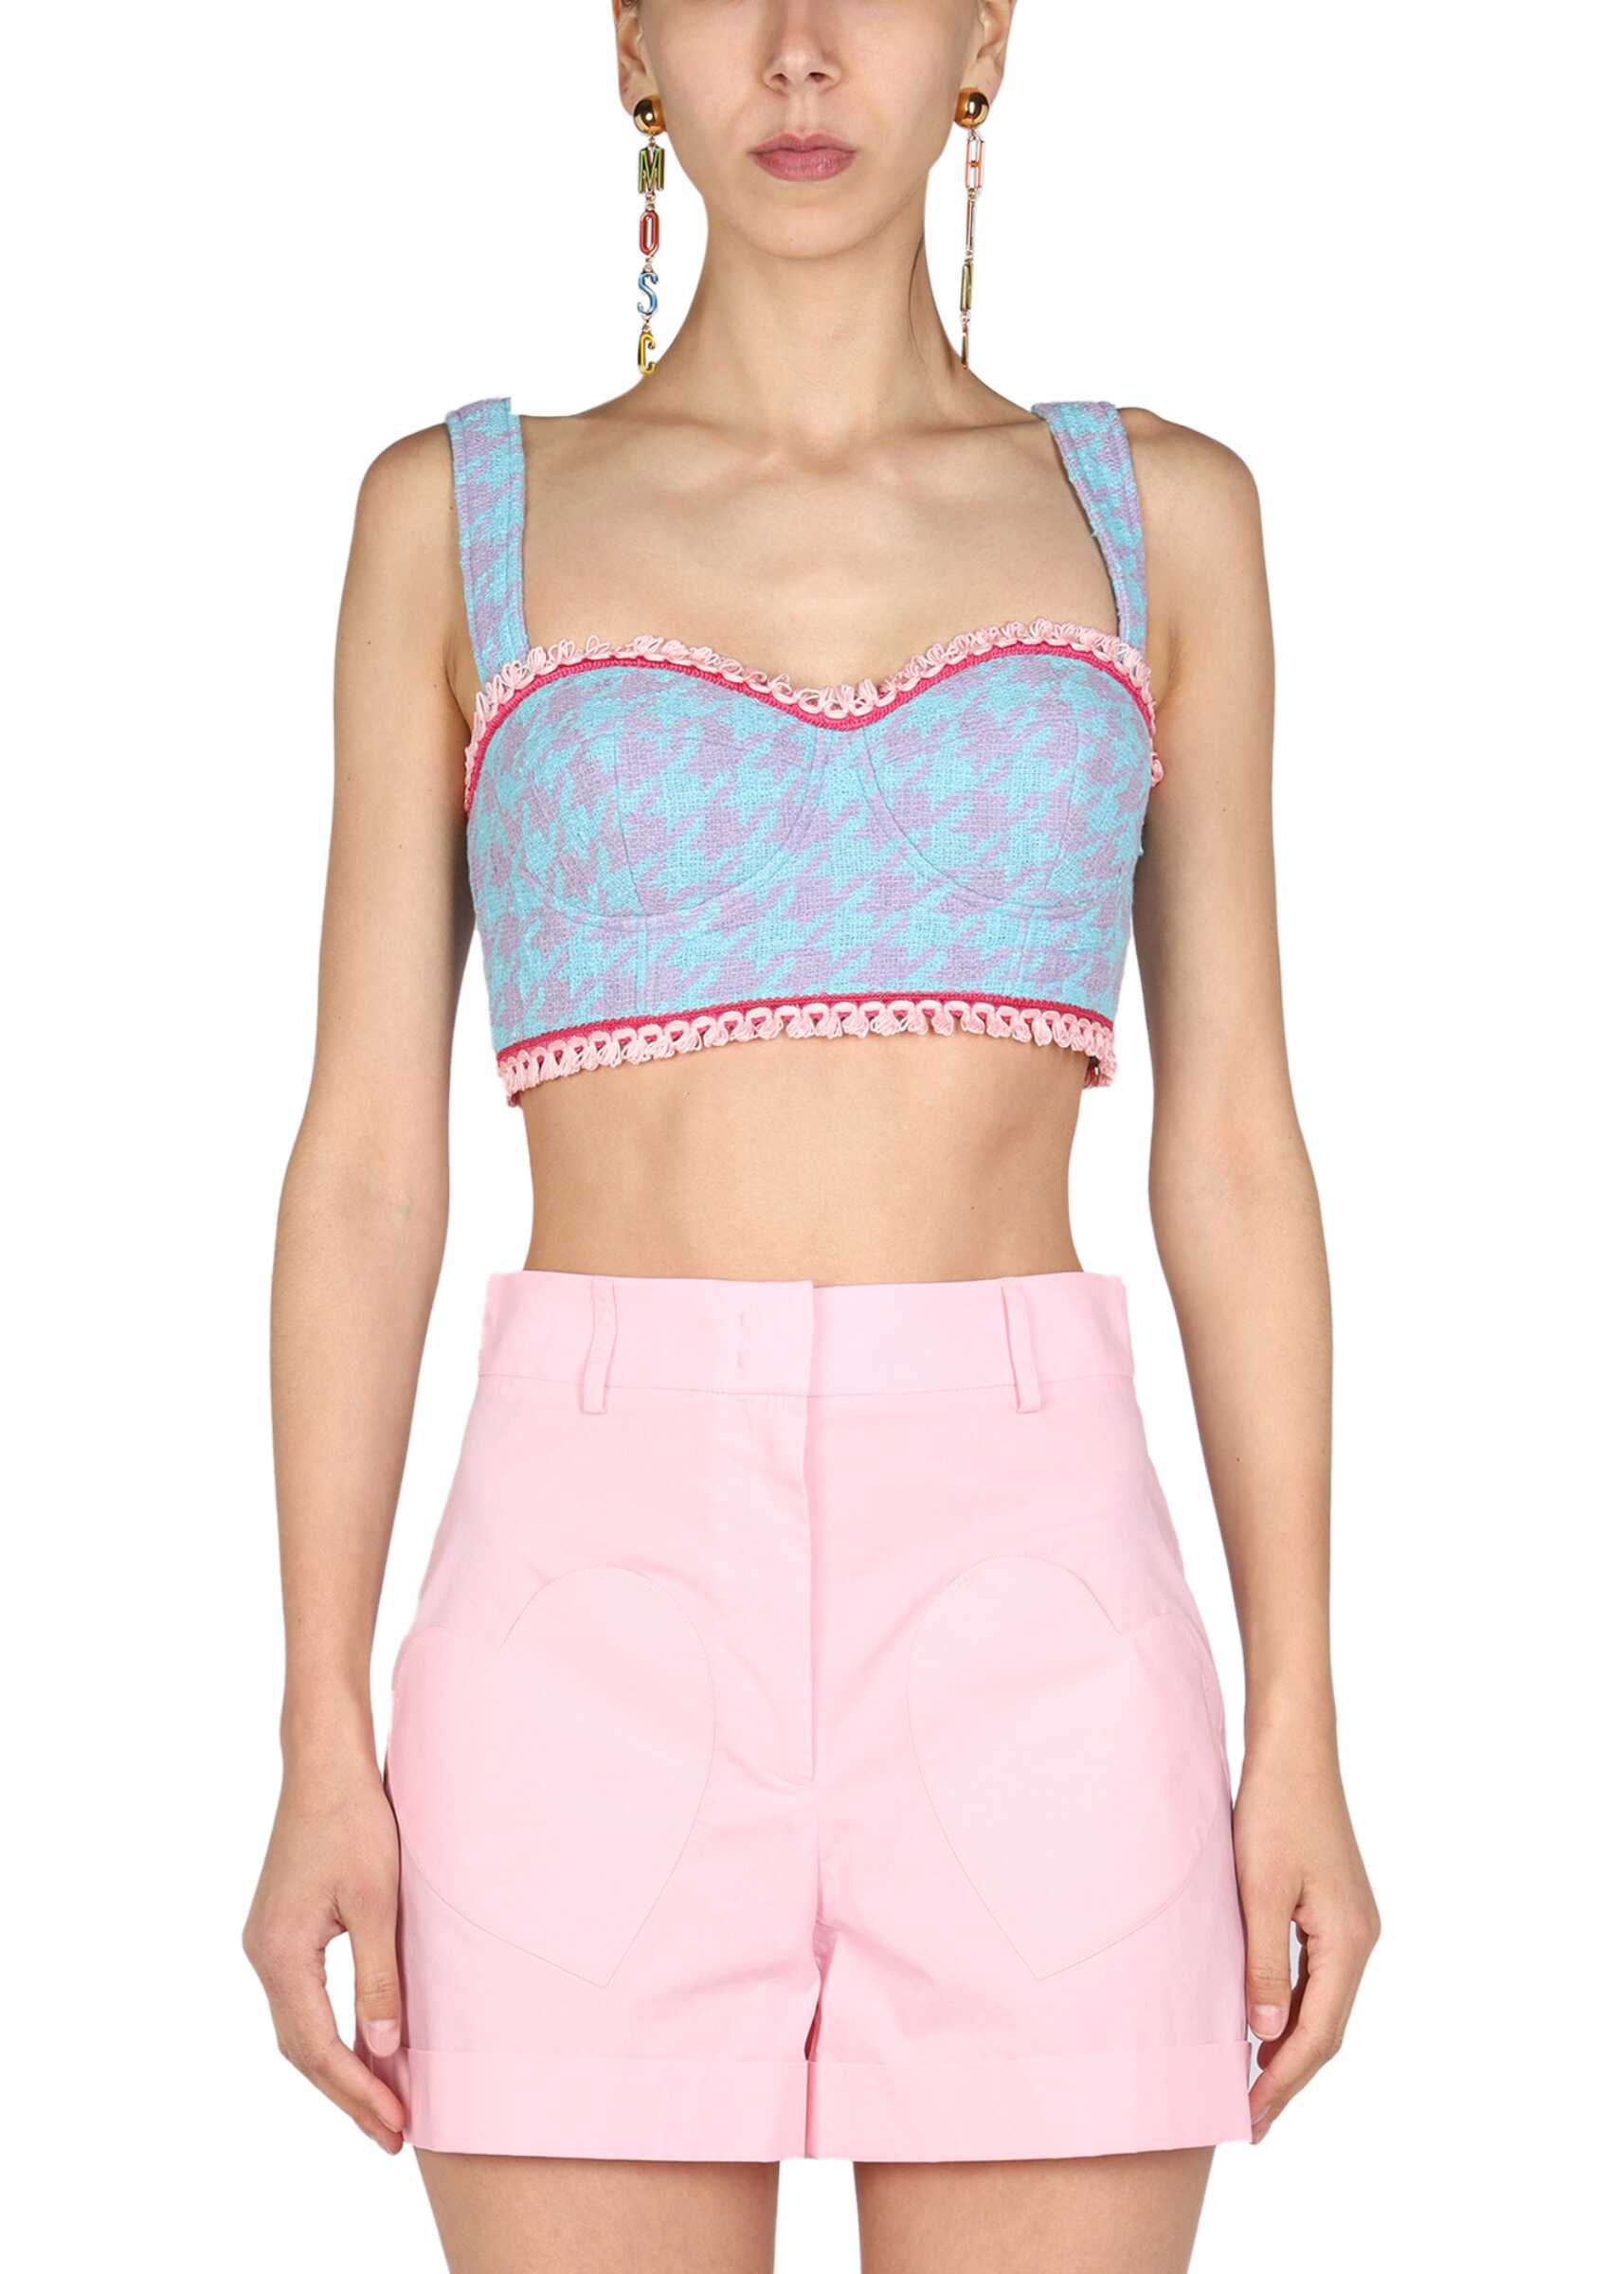 Moschino Cropped Top AZURE image0